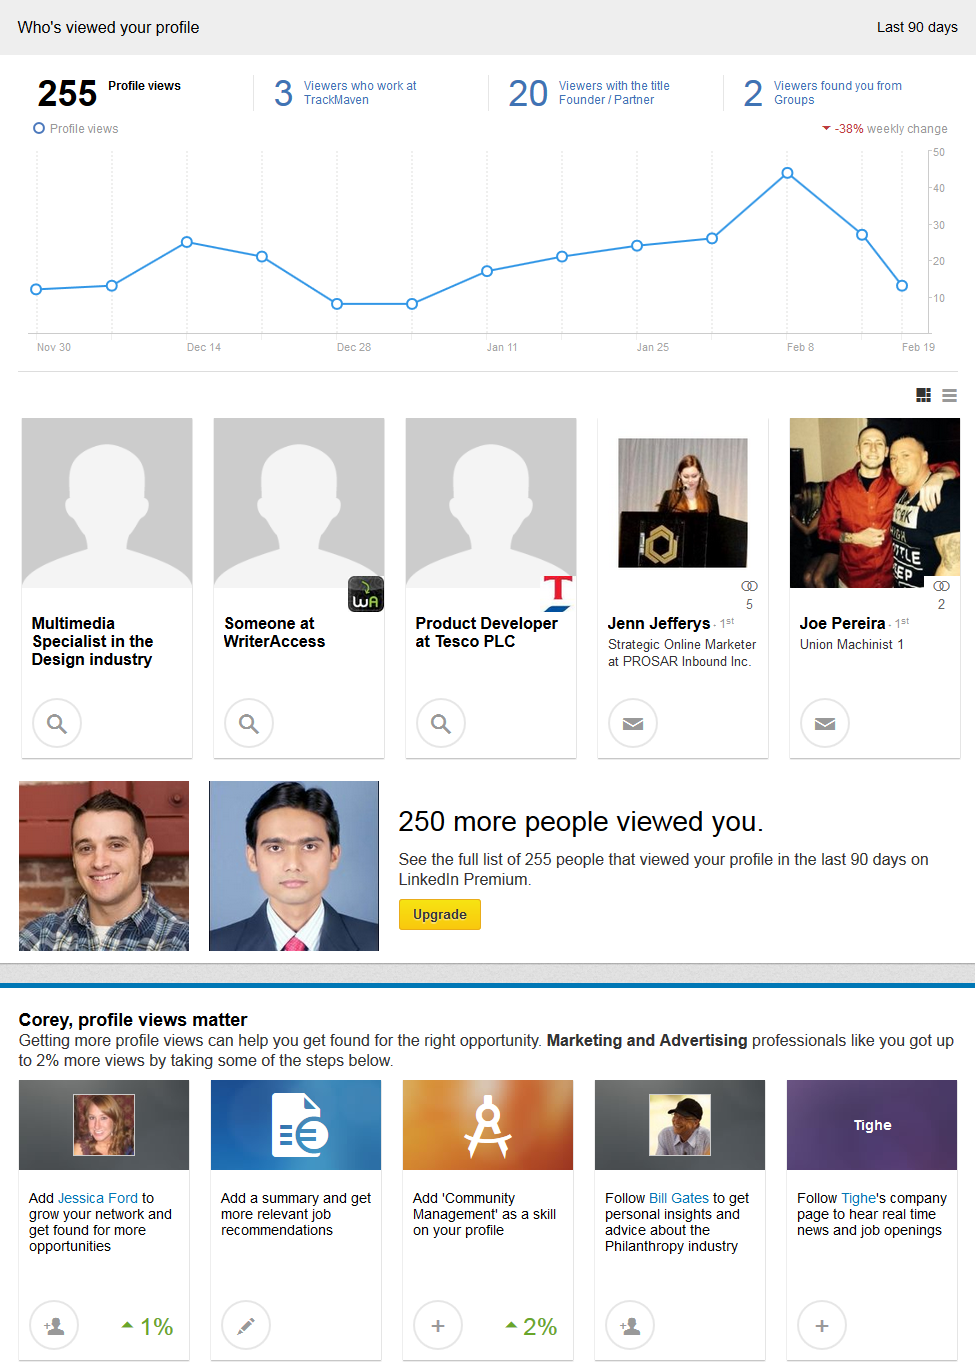 Good News for Creepers: LinkedIn Upgrades &quot;Who Viewed Your Profile&quot; Feature